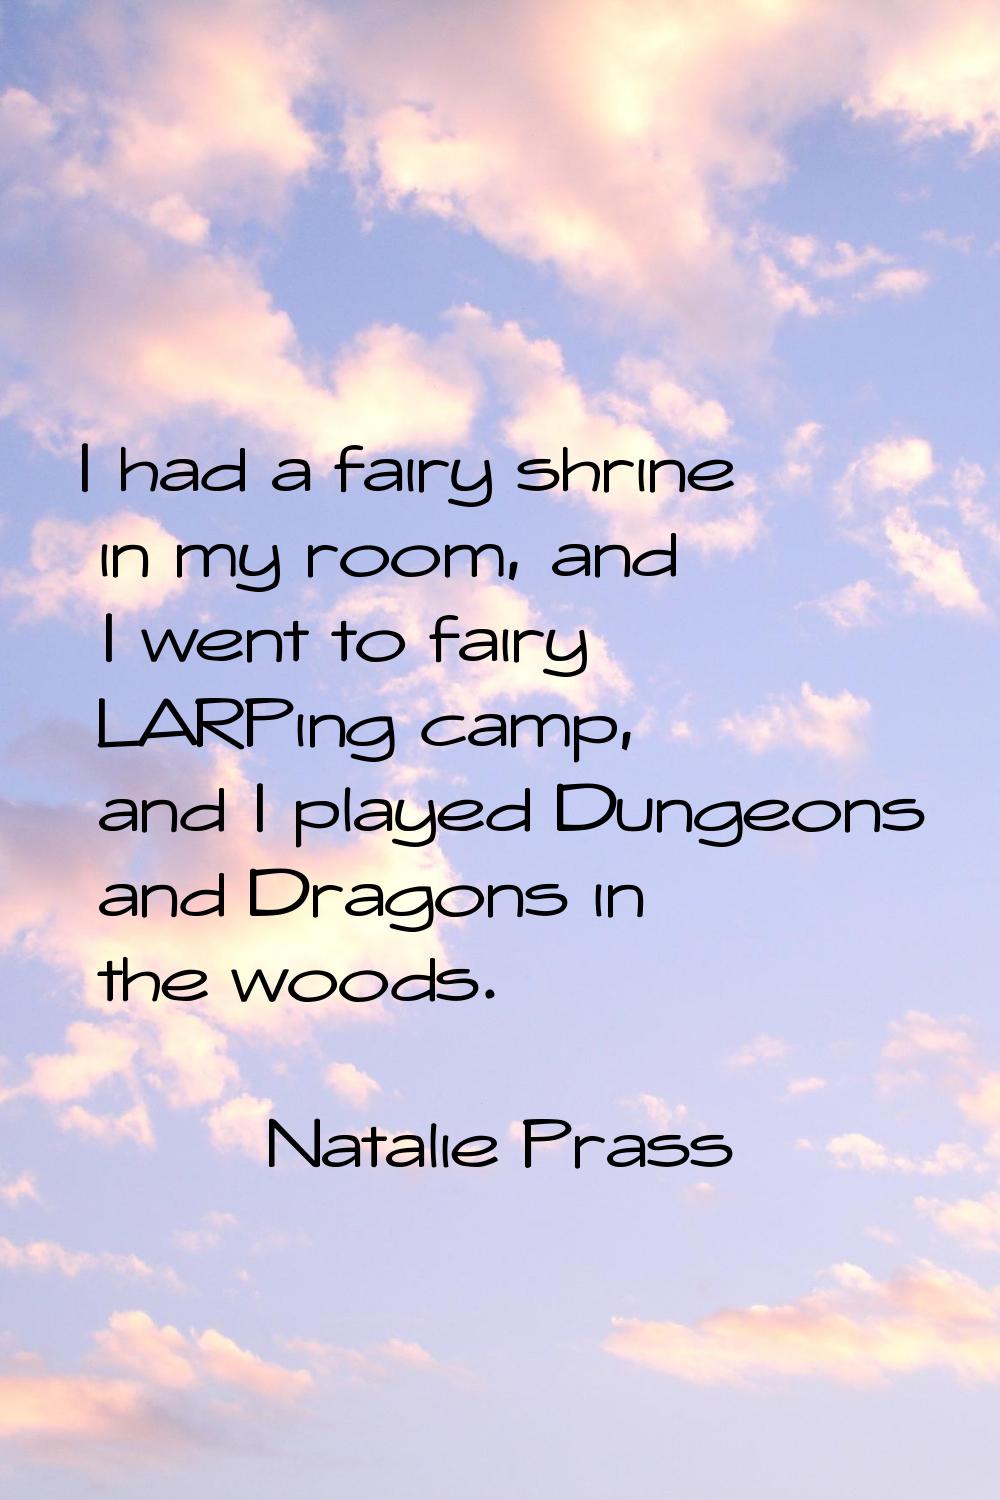 I had a fairy shrine in my room, and I went to fairy LARPing camp, and I played Dungeons and Dragon